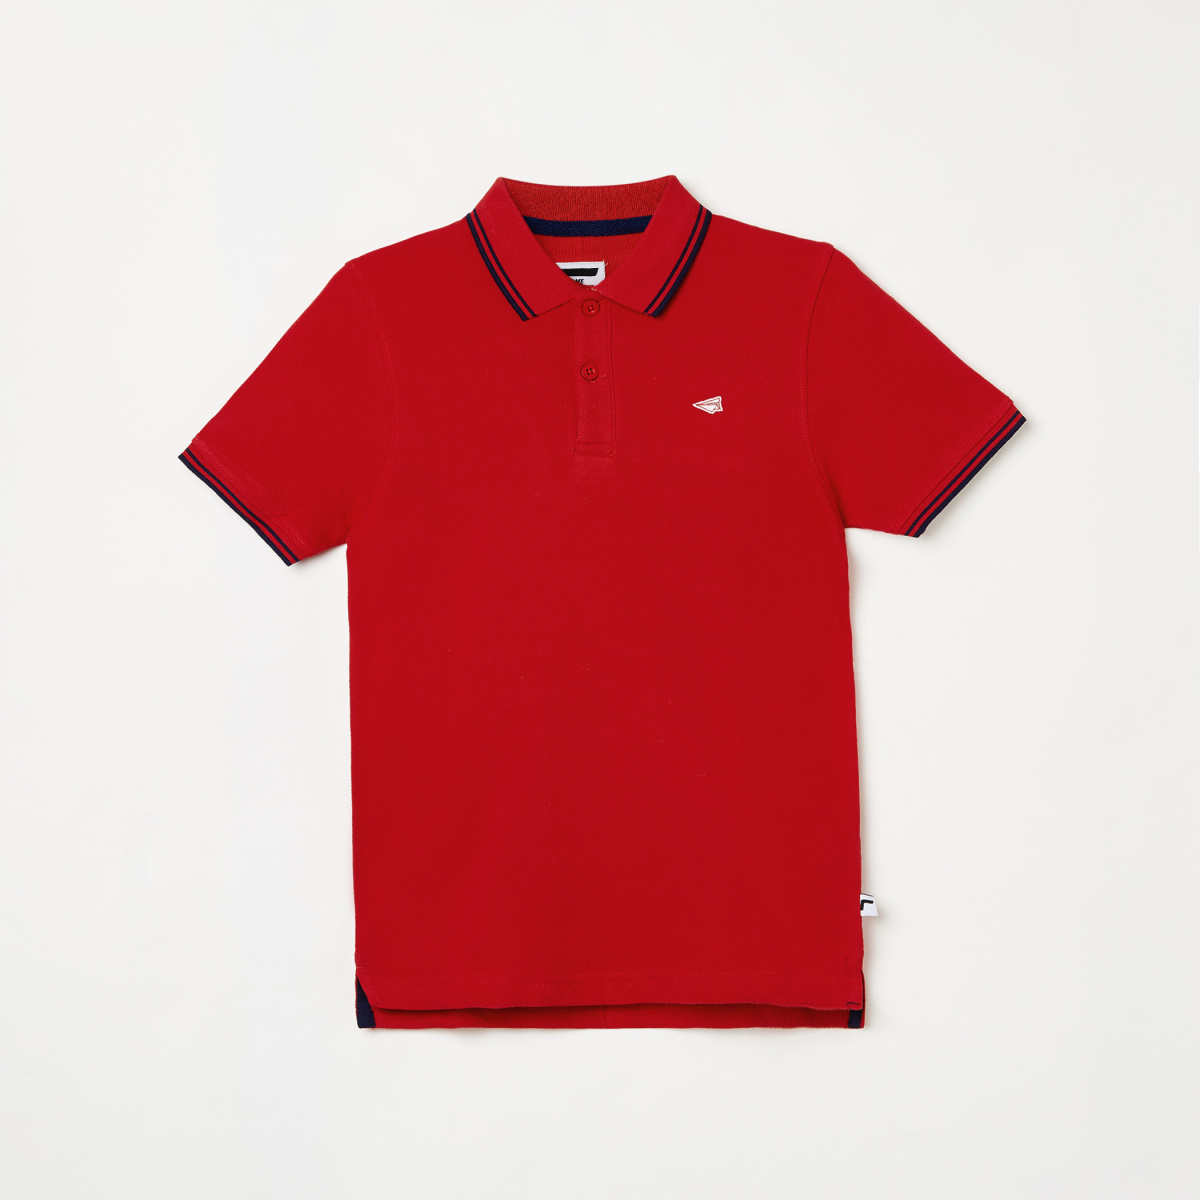 FAME FOREVER KIDS Boys Solid Polo T-shirt